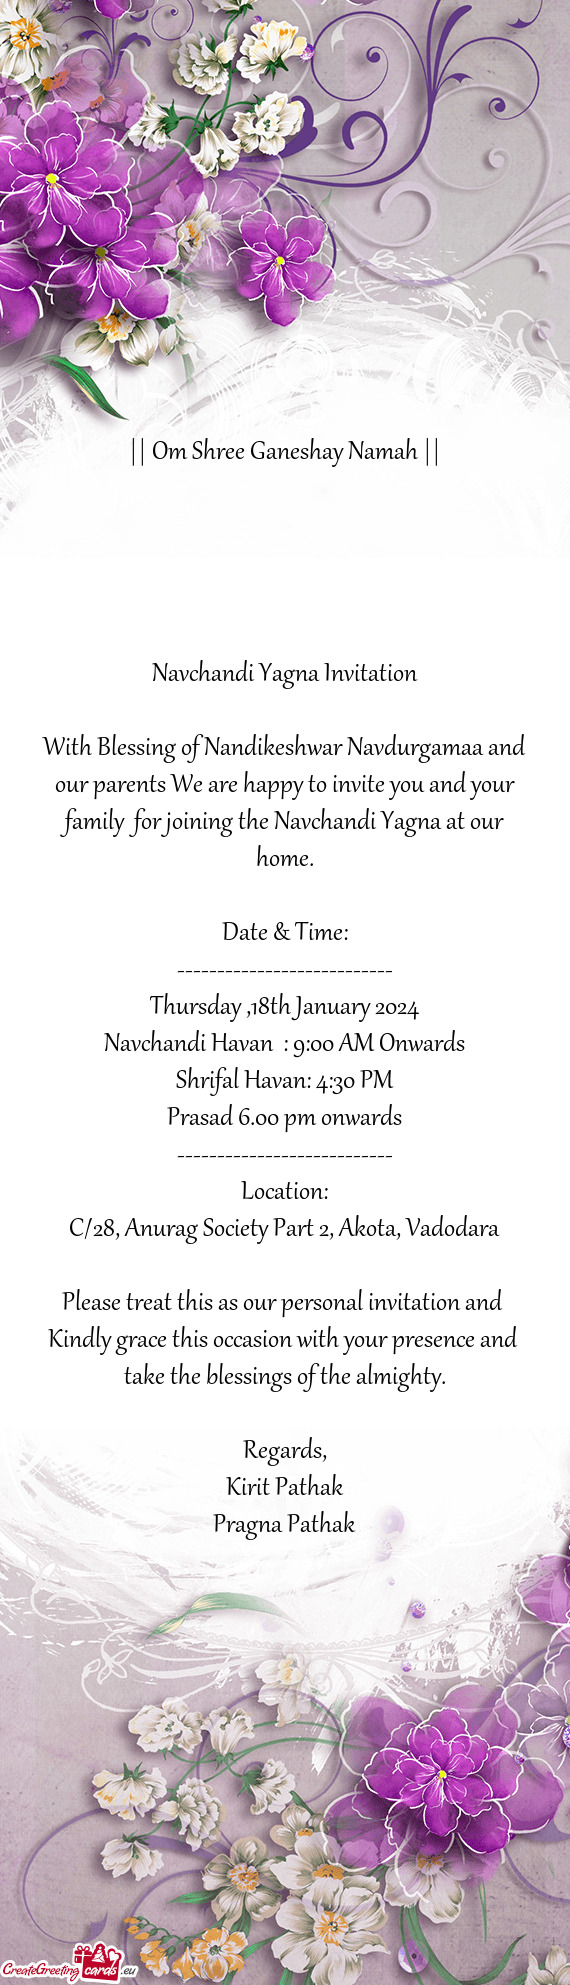 For joining the Navchandi Yagna at our home